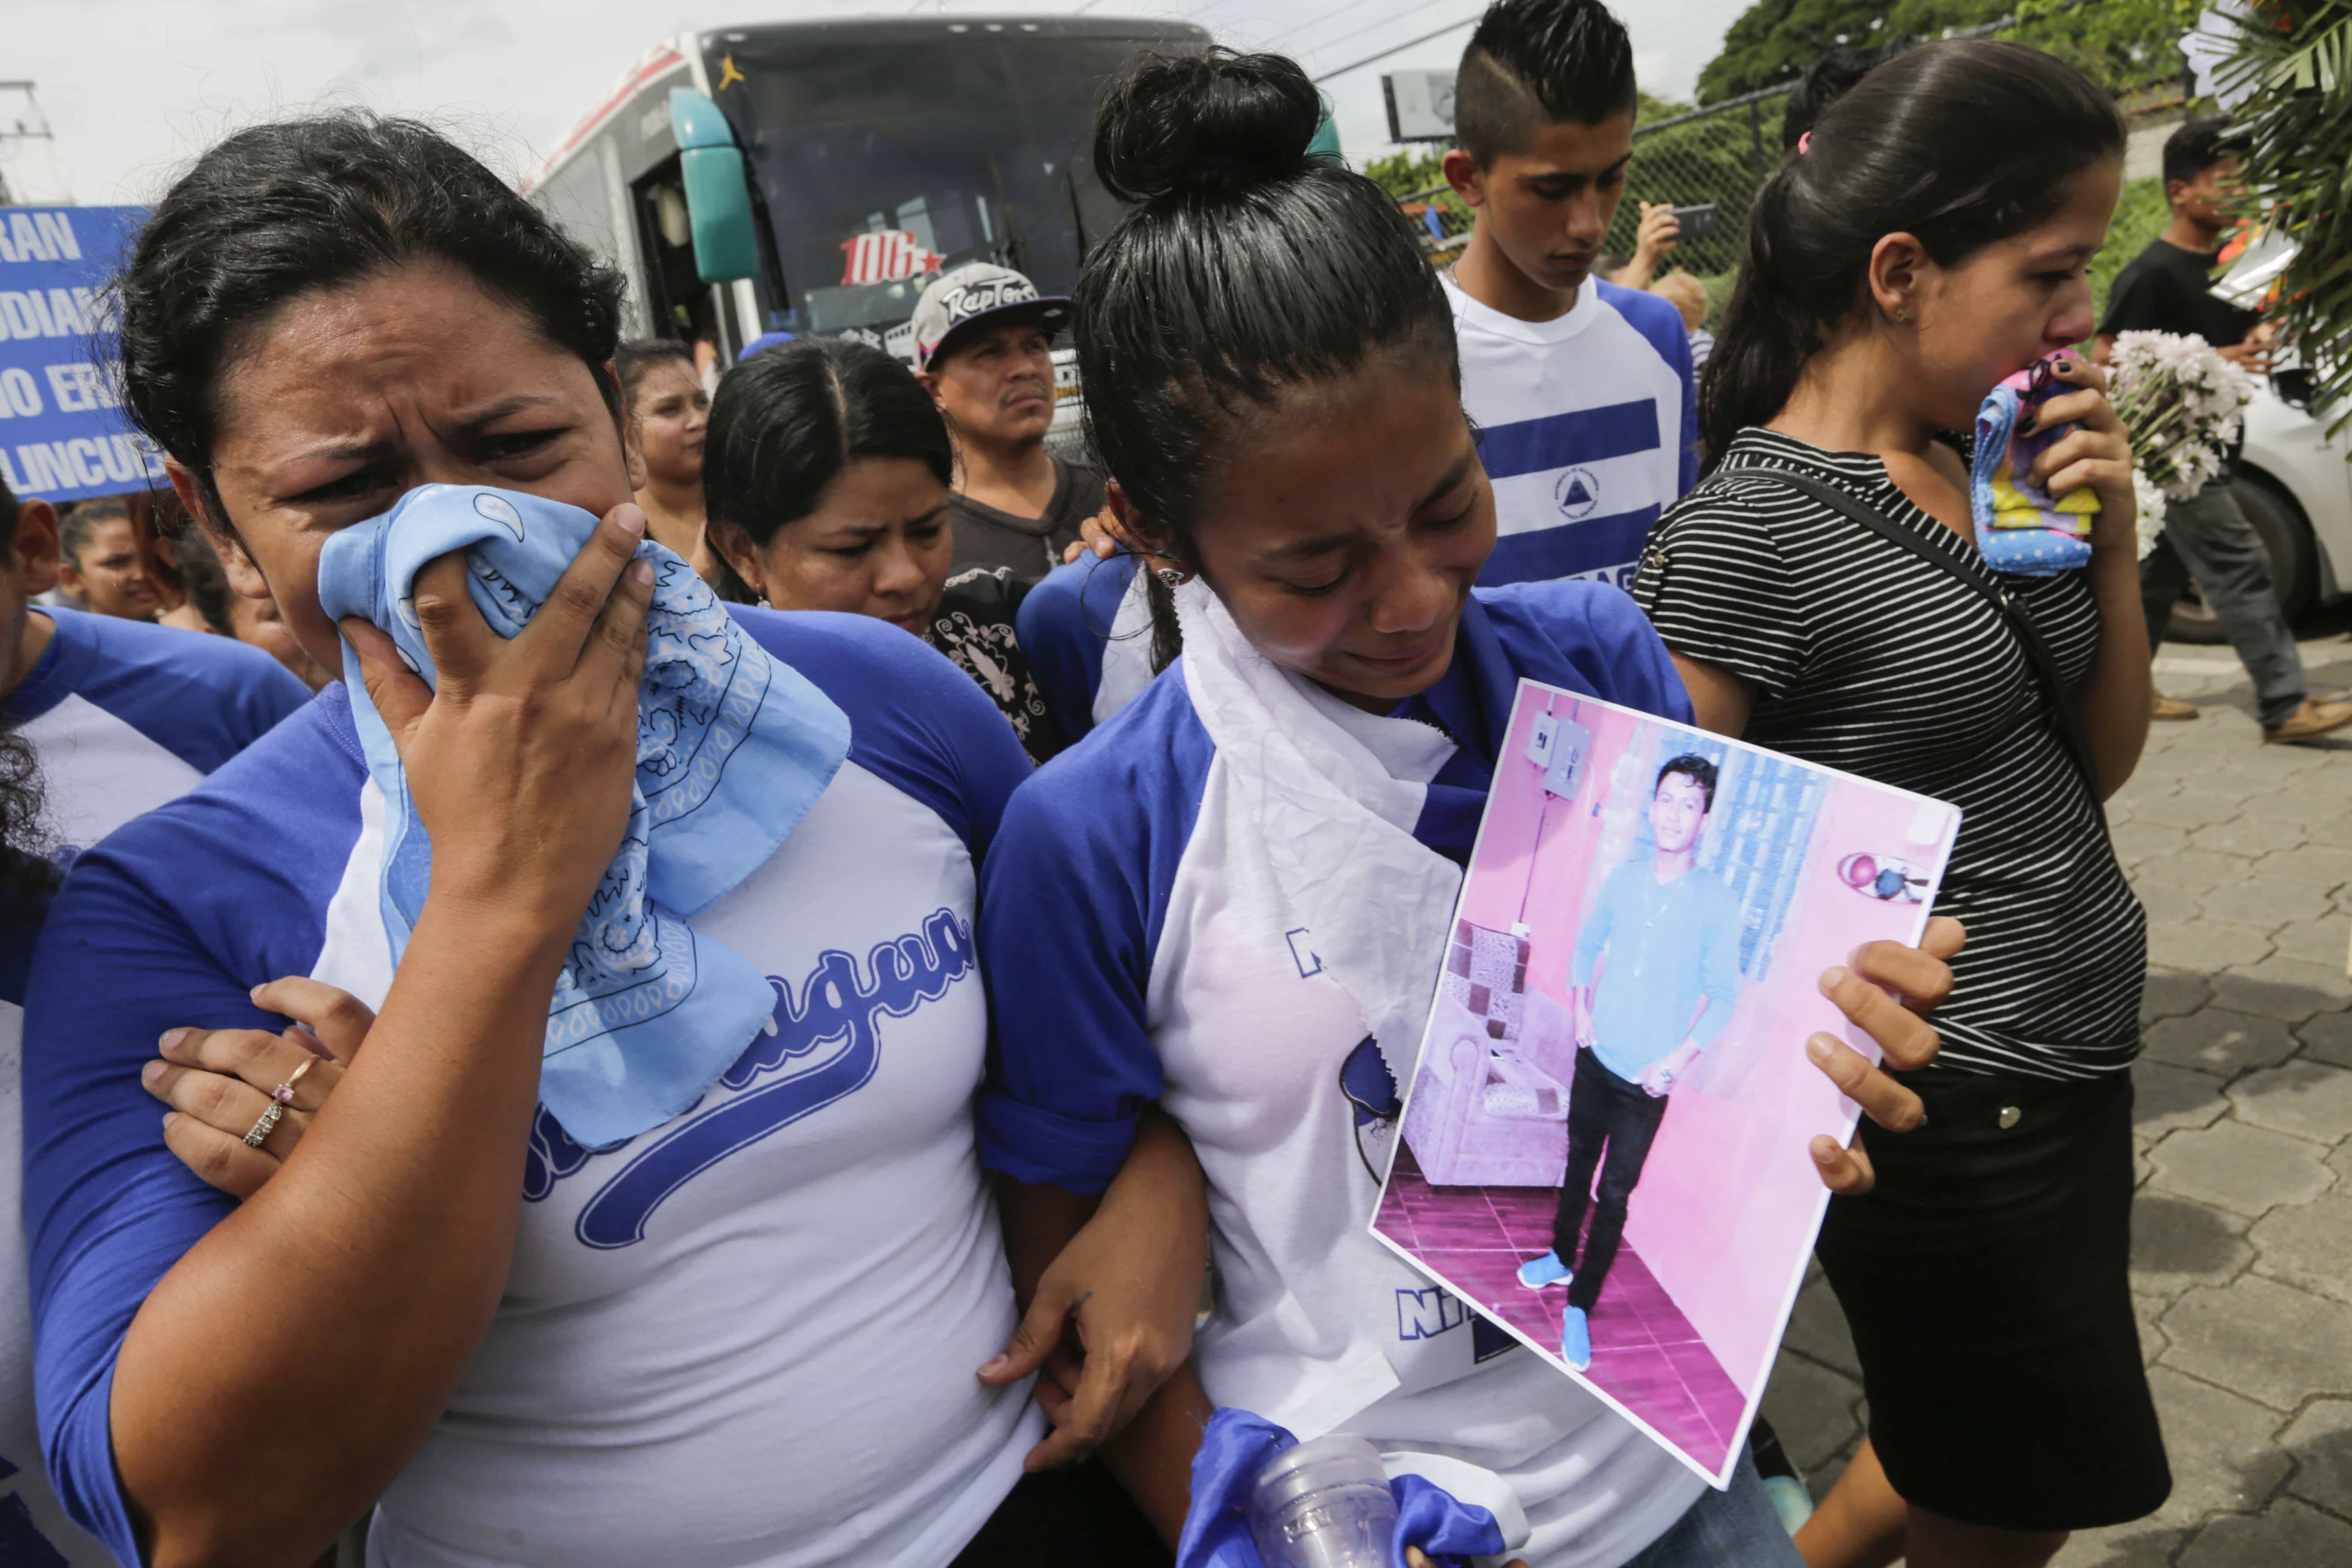 Friends and relatives cry during the funeral of the student Gerald Velazquez, shot dead during clashes with riot police in a church near the National Autonomous University of Nicaragua, on 16 July 2018, INTI OCON/AFP/Getty Images